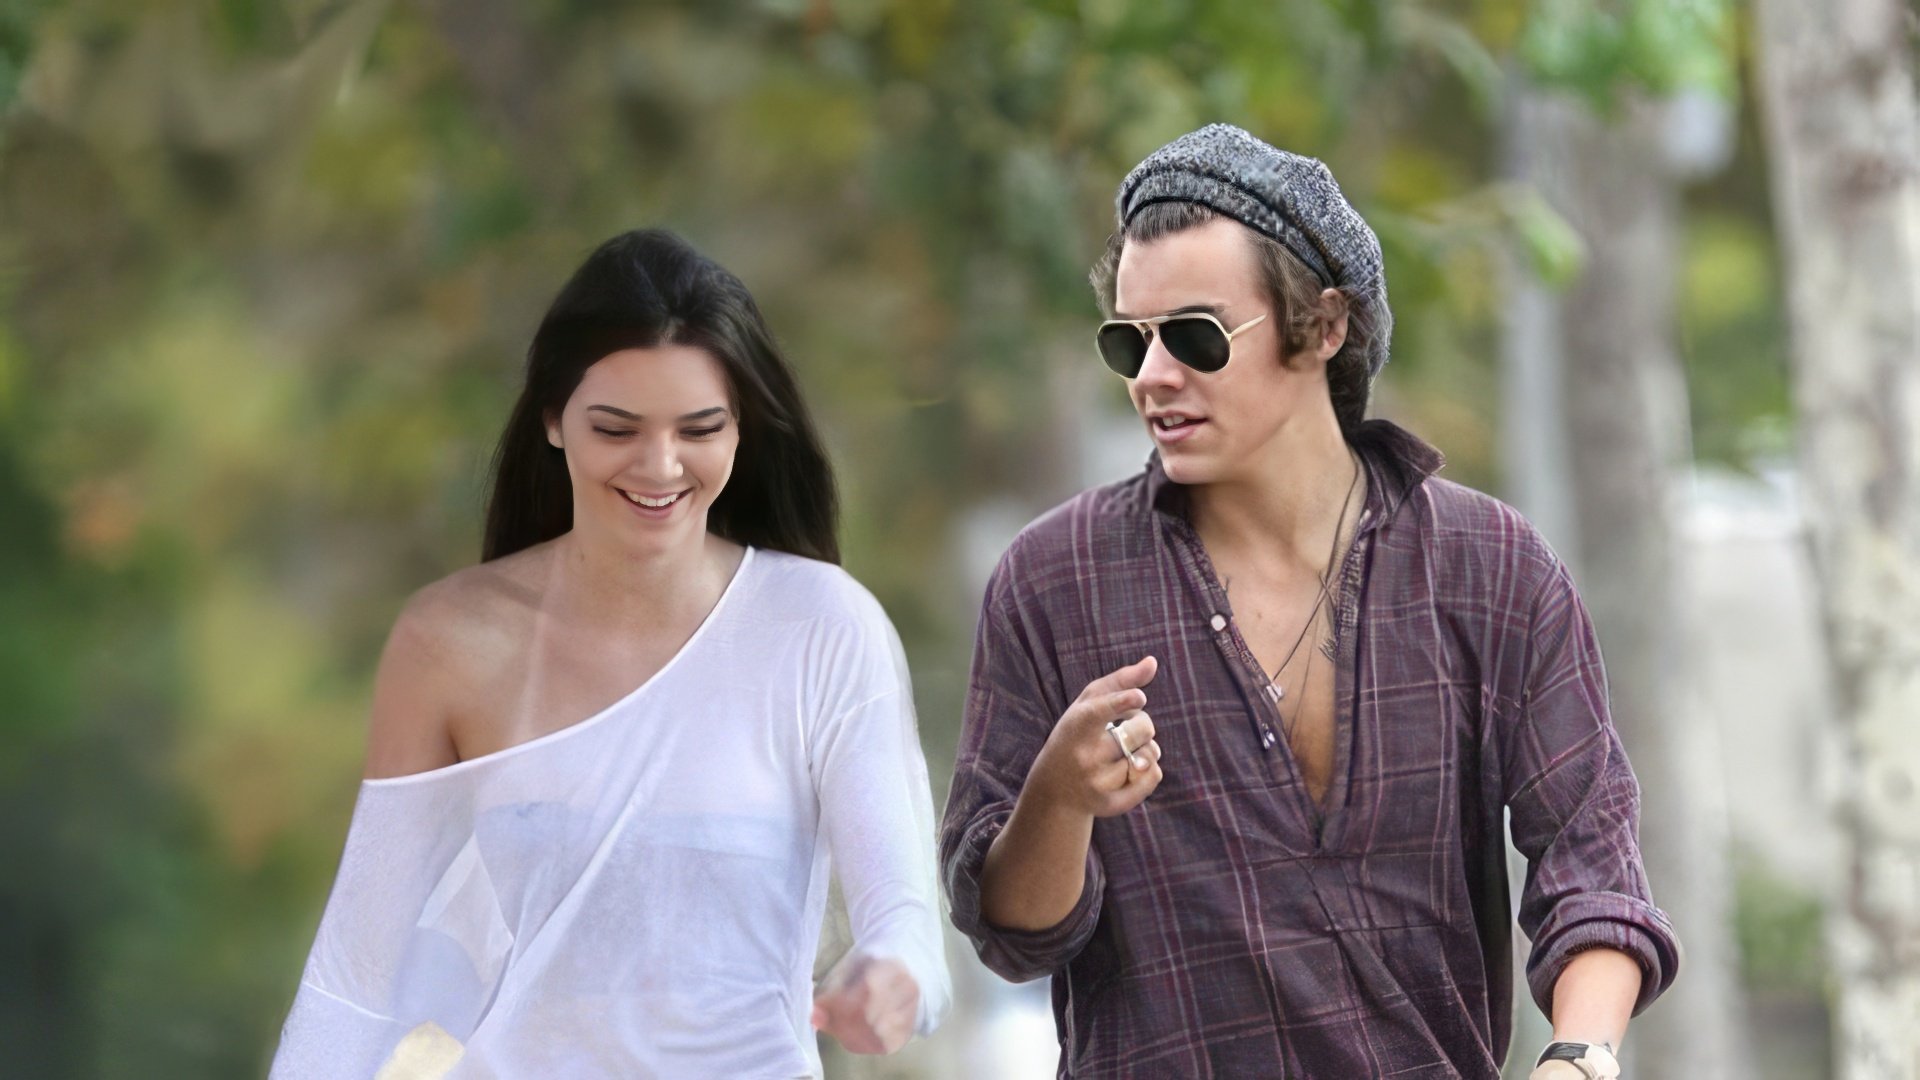 Harry Styles and Kendall Jenner's romance continues